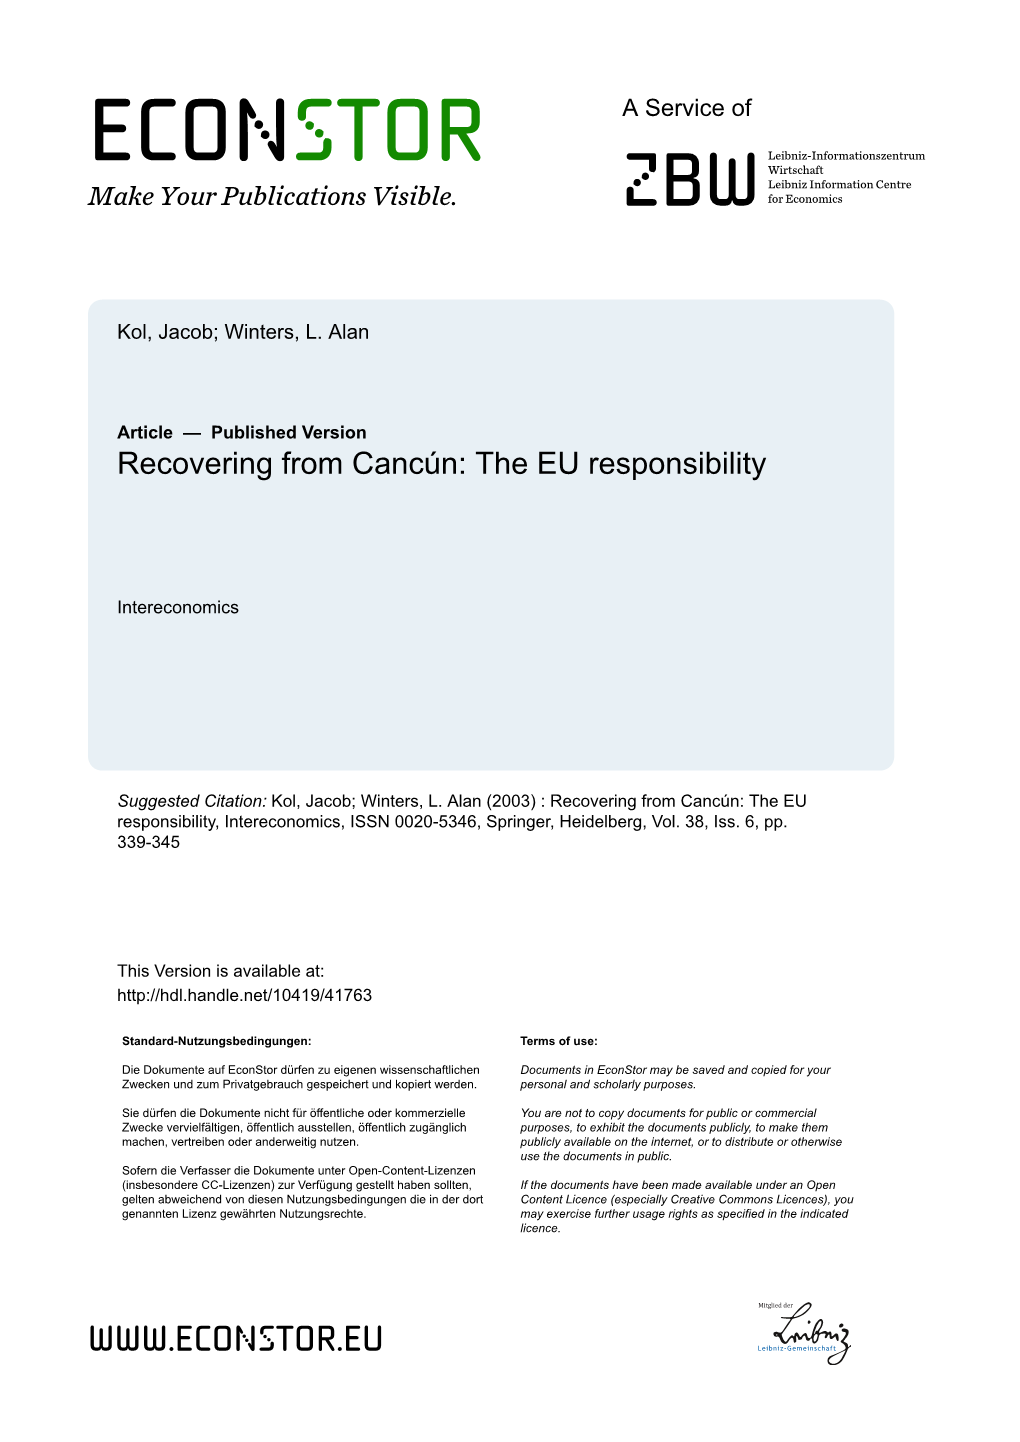 Recovering from Cancún: the EU Responsibility